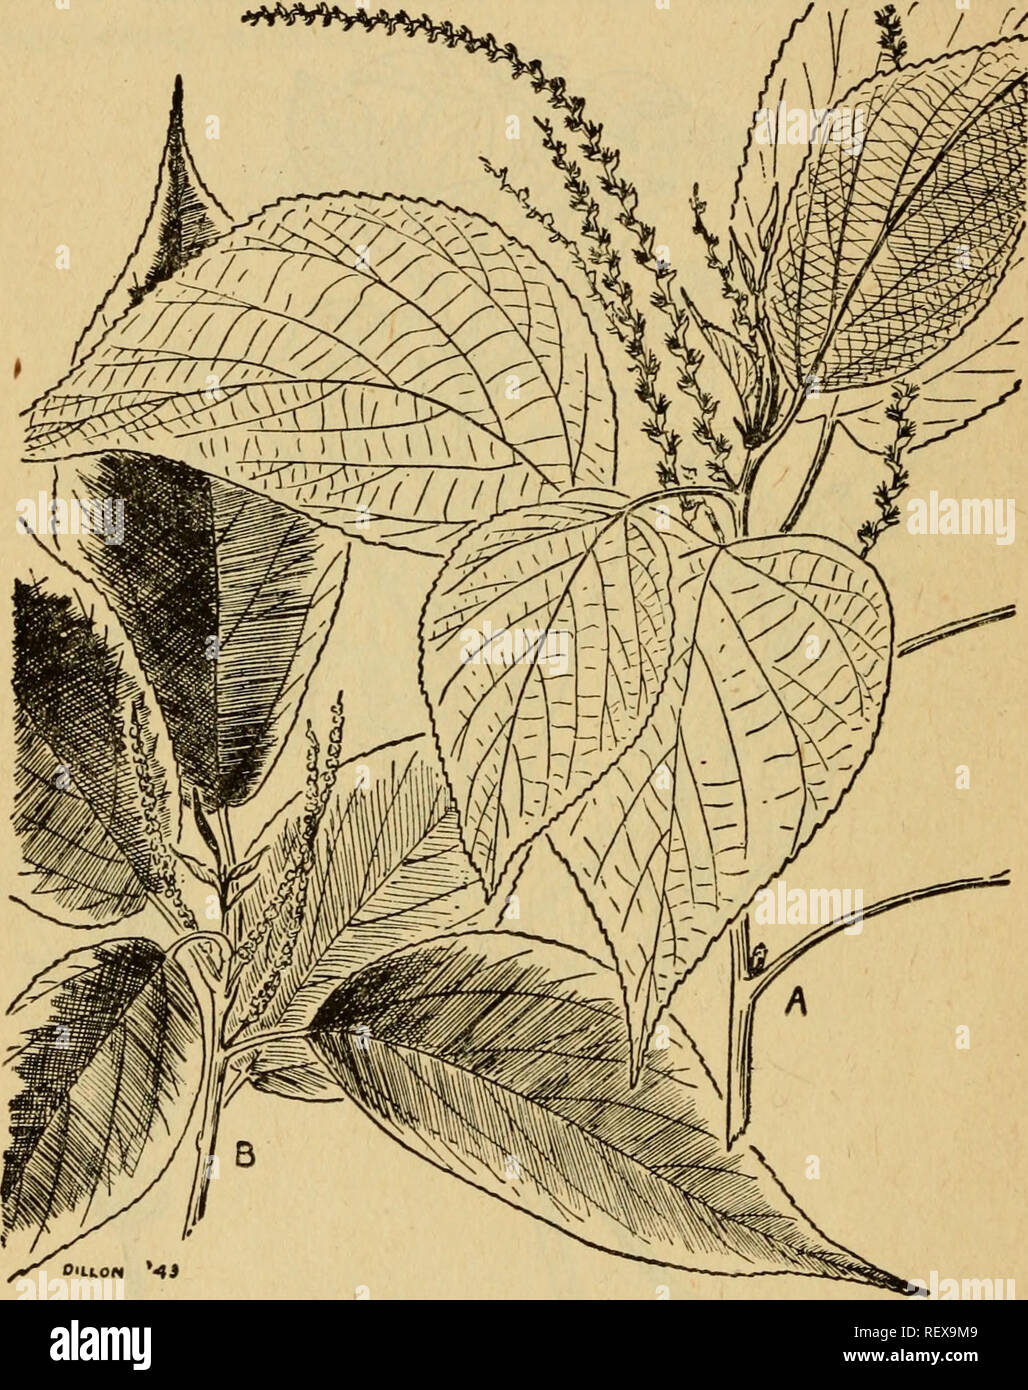 . Emergency food plants and poisonous plants of the islands of the Pacific. Plants, Edible -- Islands of the Pacific; Poisonous plants. 20 QUARTERMASTER CORPS by its colored leaves. It is a native of Polynesia and is planted in hedges and near houses throughout Malaya, fre- quently abundant. The young shoots and young leaves may. Figure 52.—Acalypha loilkesiana. be cooked and eaten. There are various other species of this genus, herbs, shrubs, or small trees, all with green leaves, whose young parts may also be similarly prepared and eaten with safety. Local names: Ddun-vidngsi, ddun- ndngsi,  Stock Photo